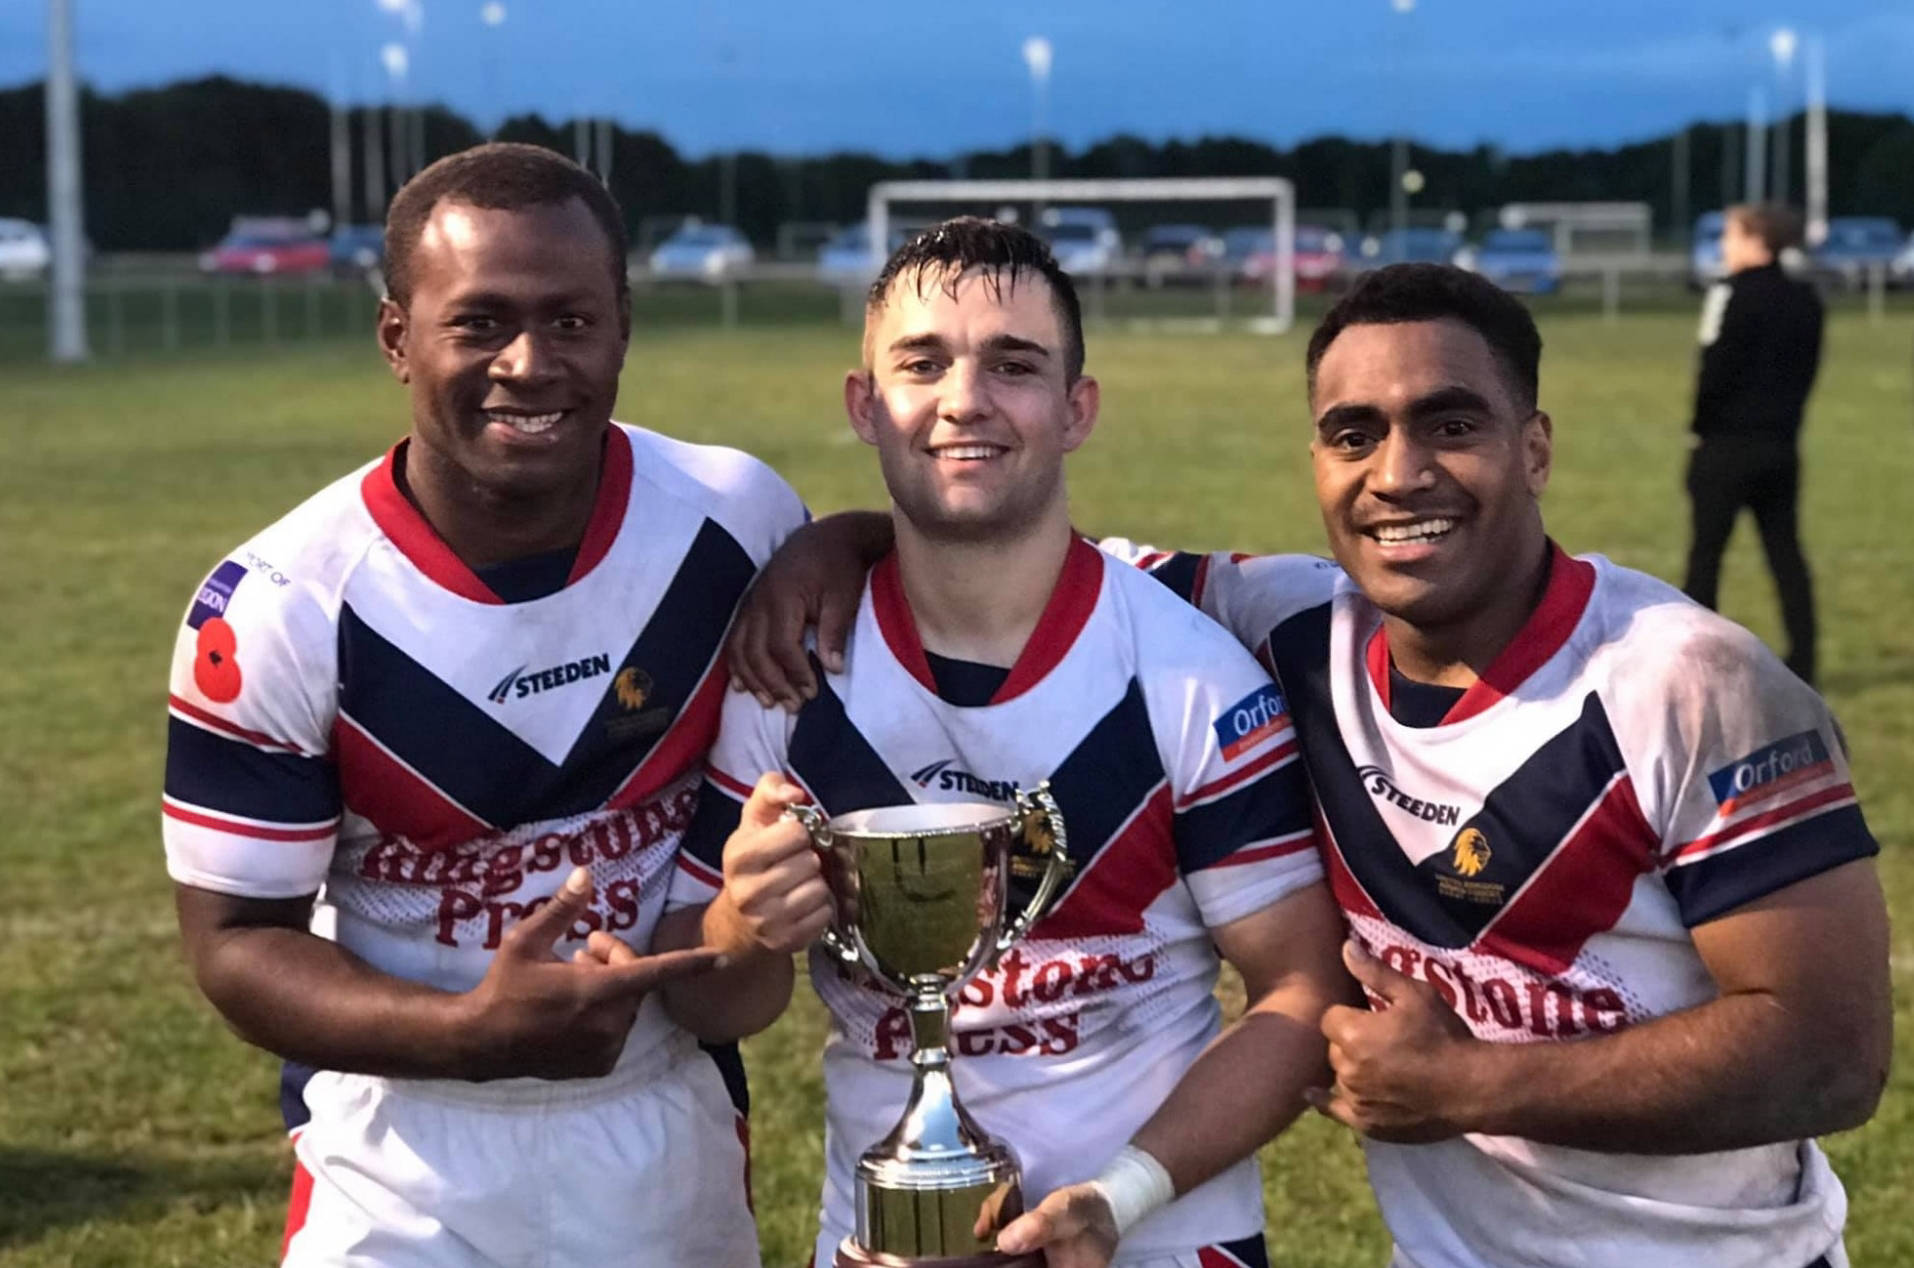 UK Armed Forces win Presidents Cup